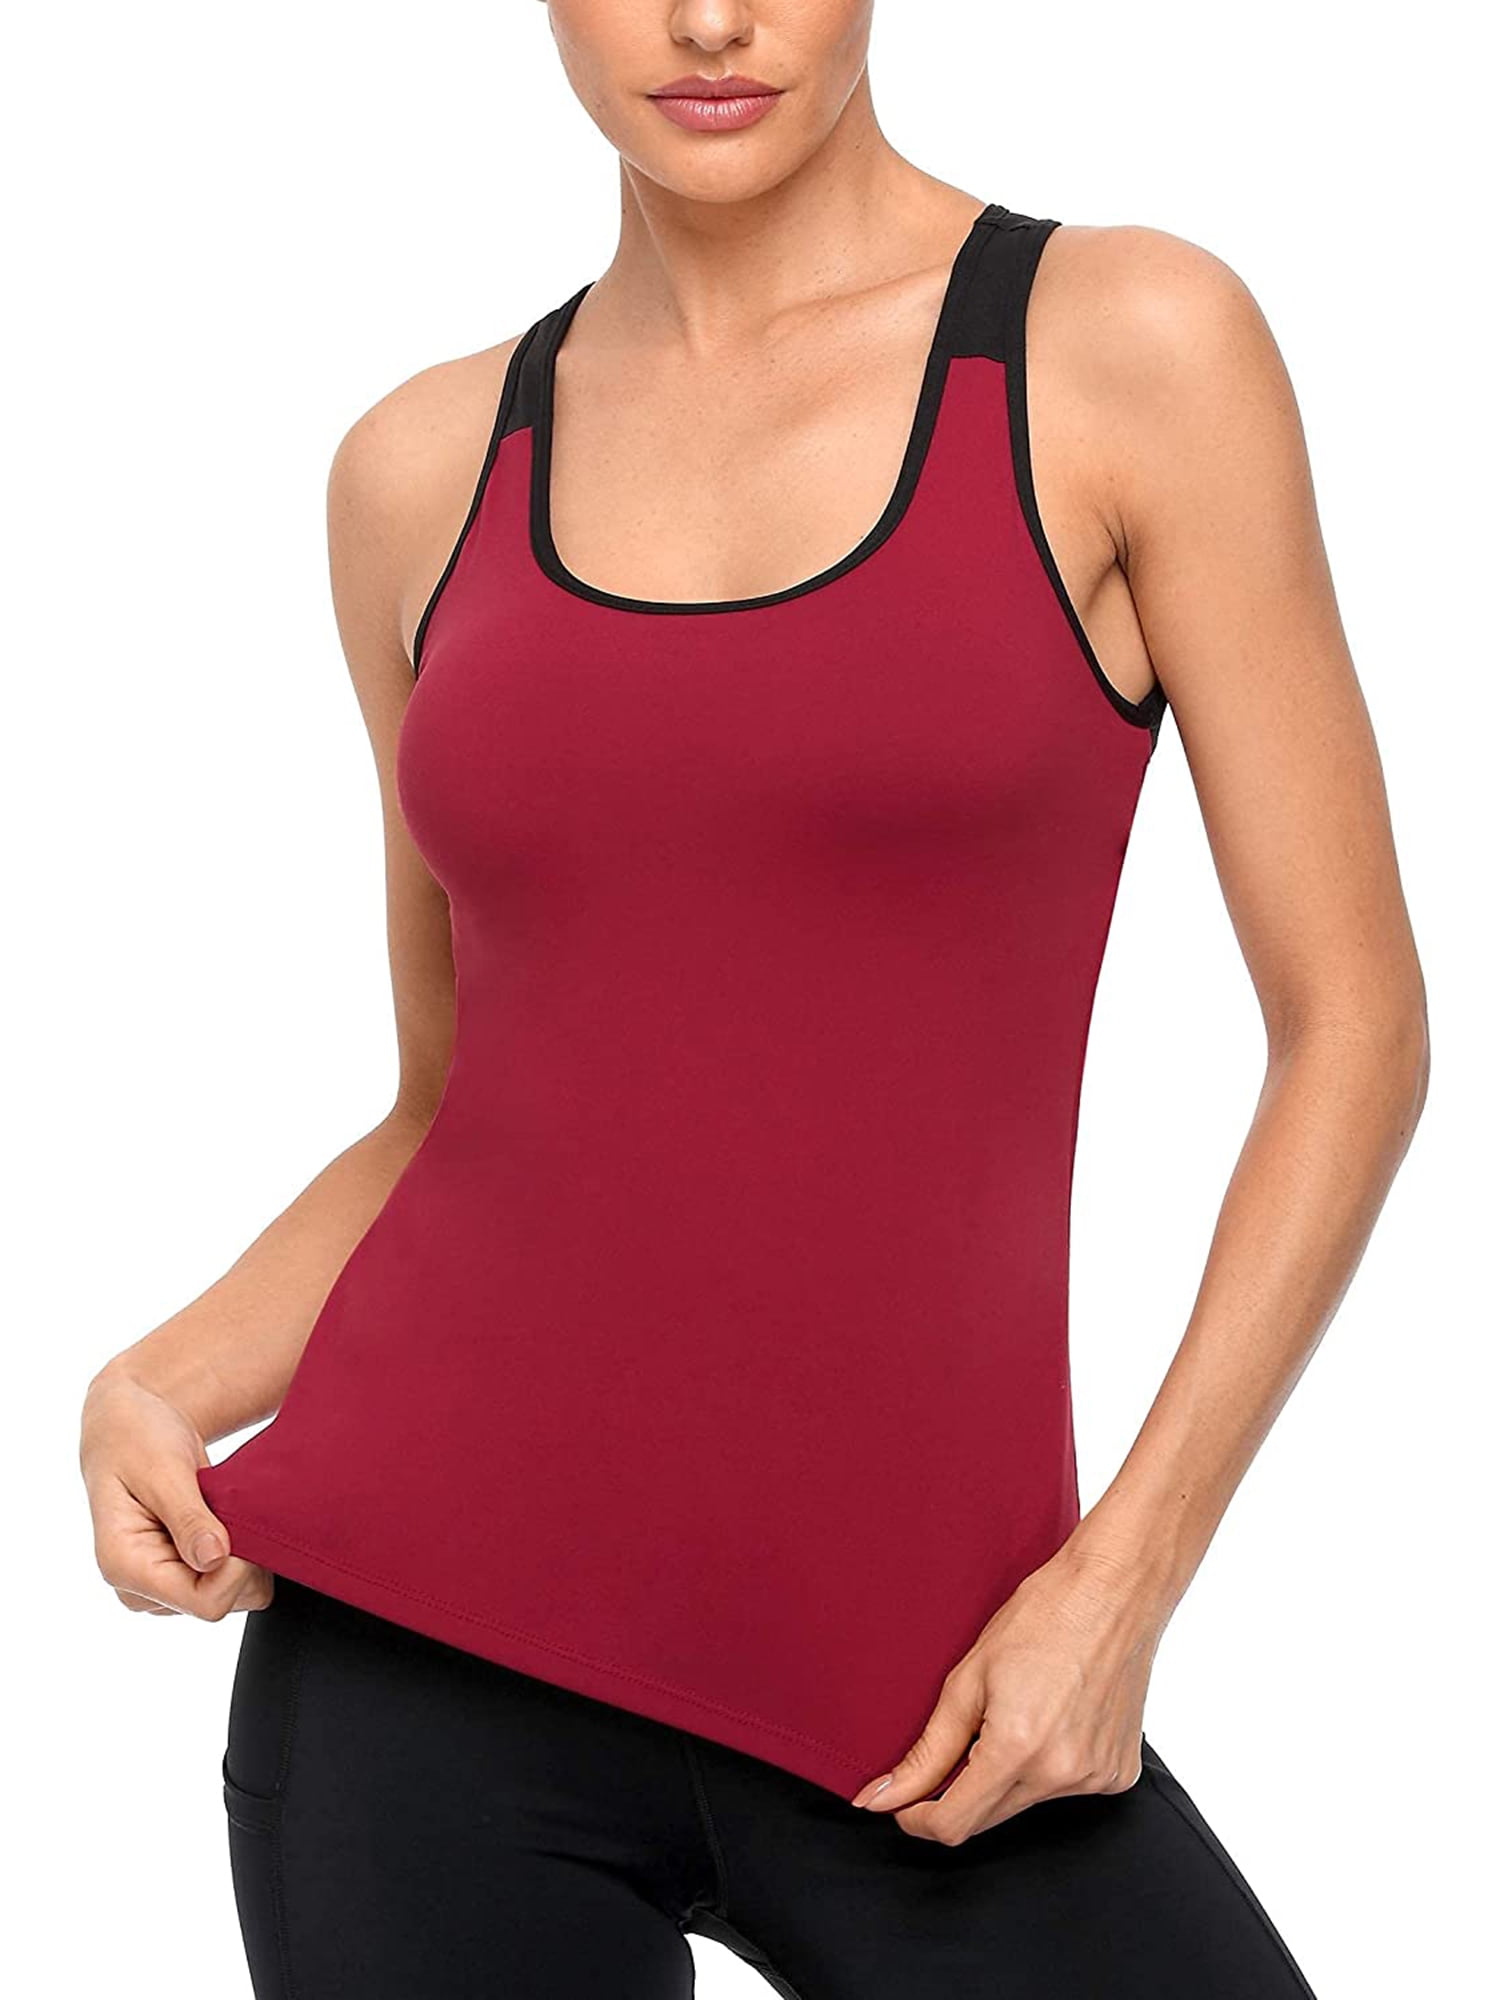 Womens Workout Tank Top with Built in Bra Backless Athletic Yoga Running  Shirt 